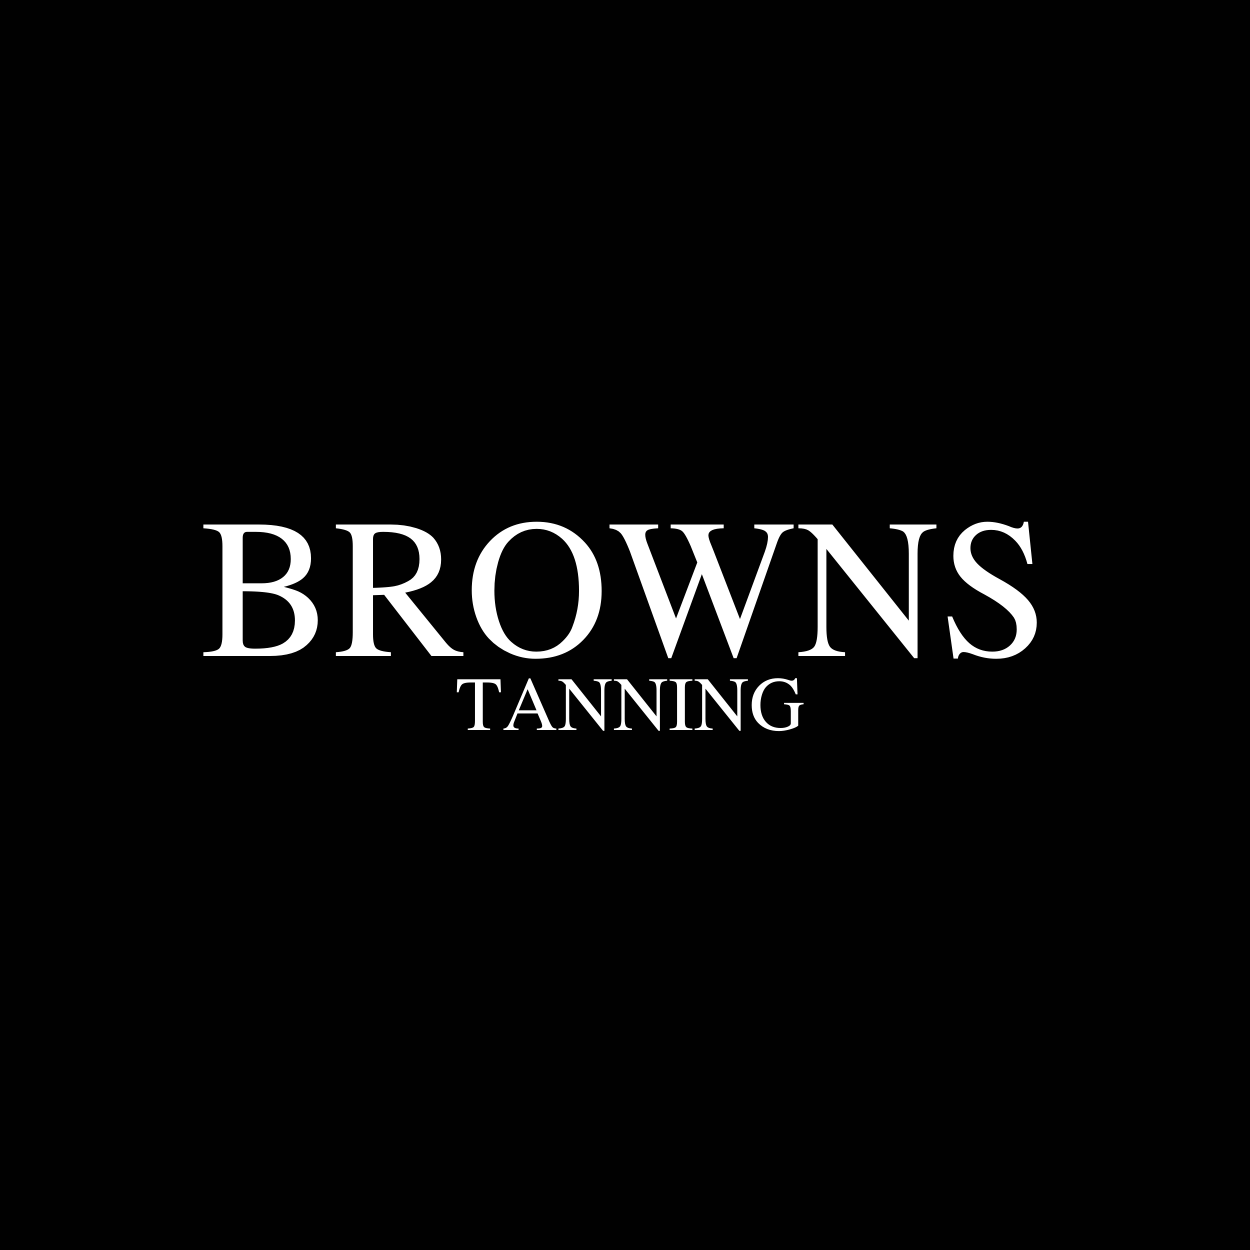 Browns Tanning & Beauty Salon: Home NEW 2022